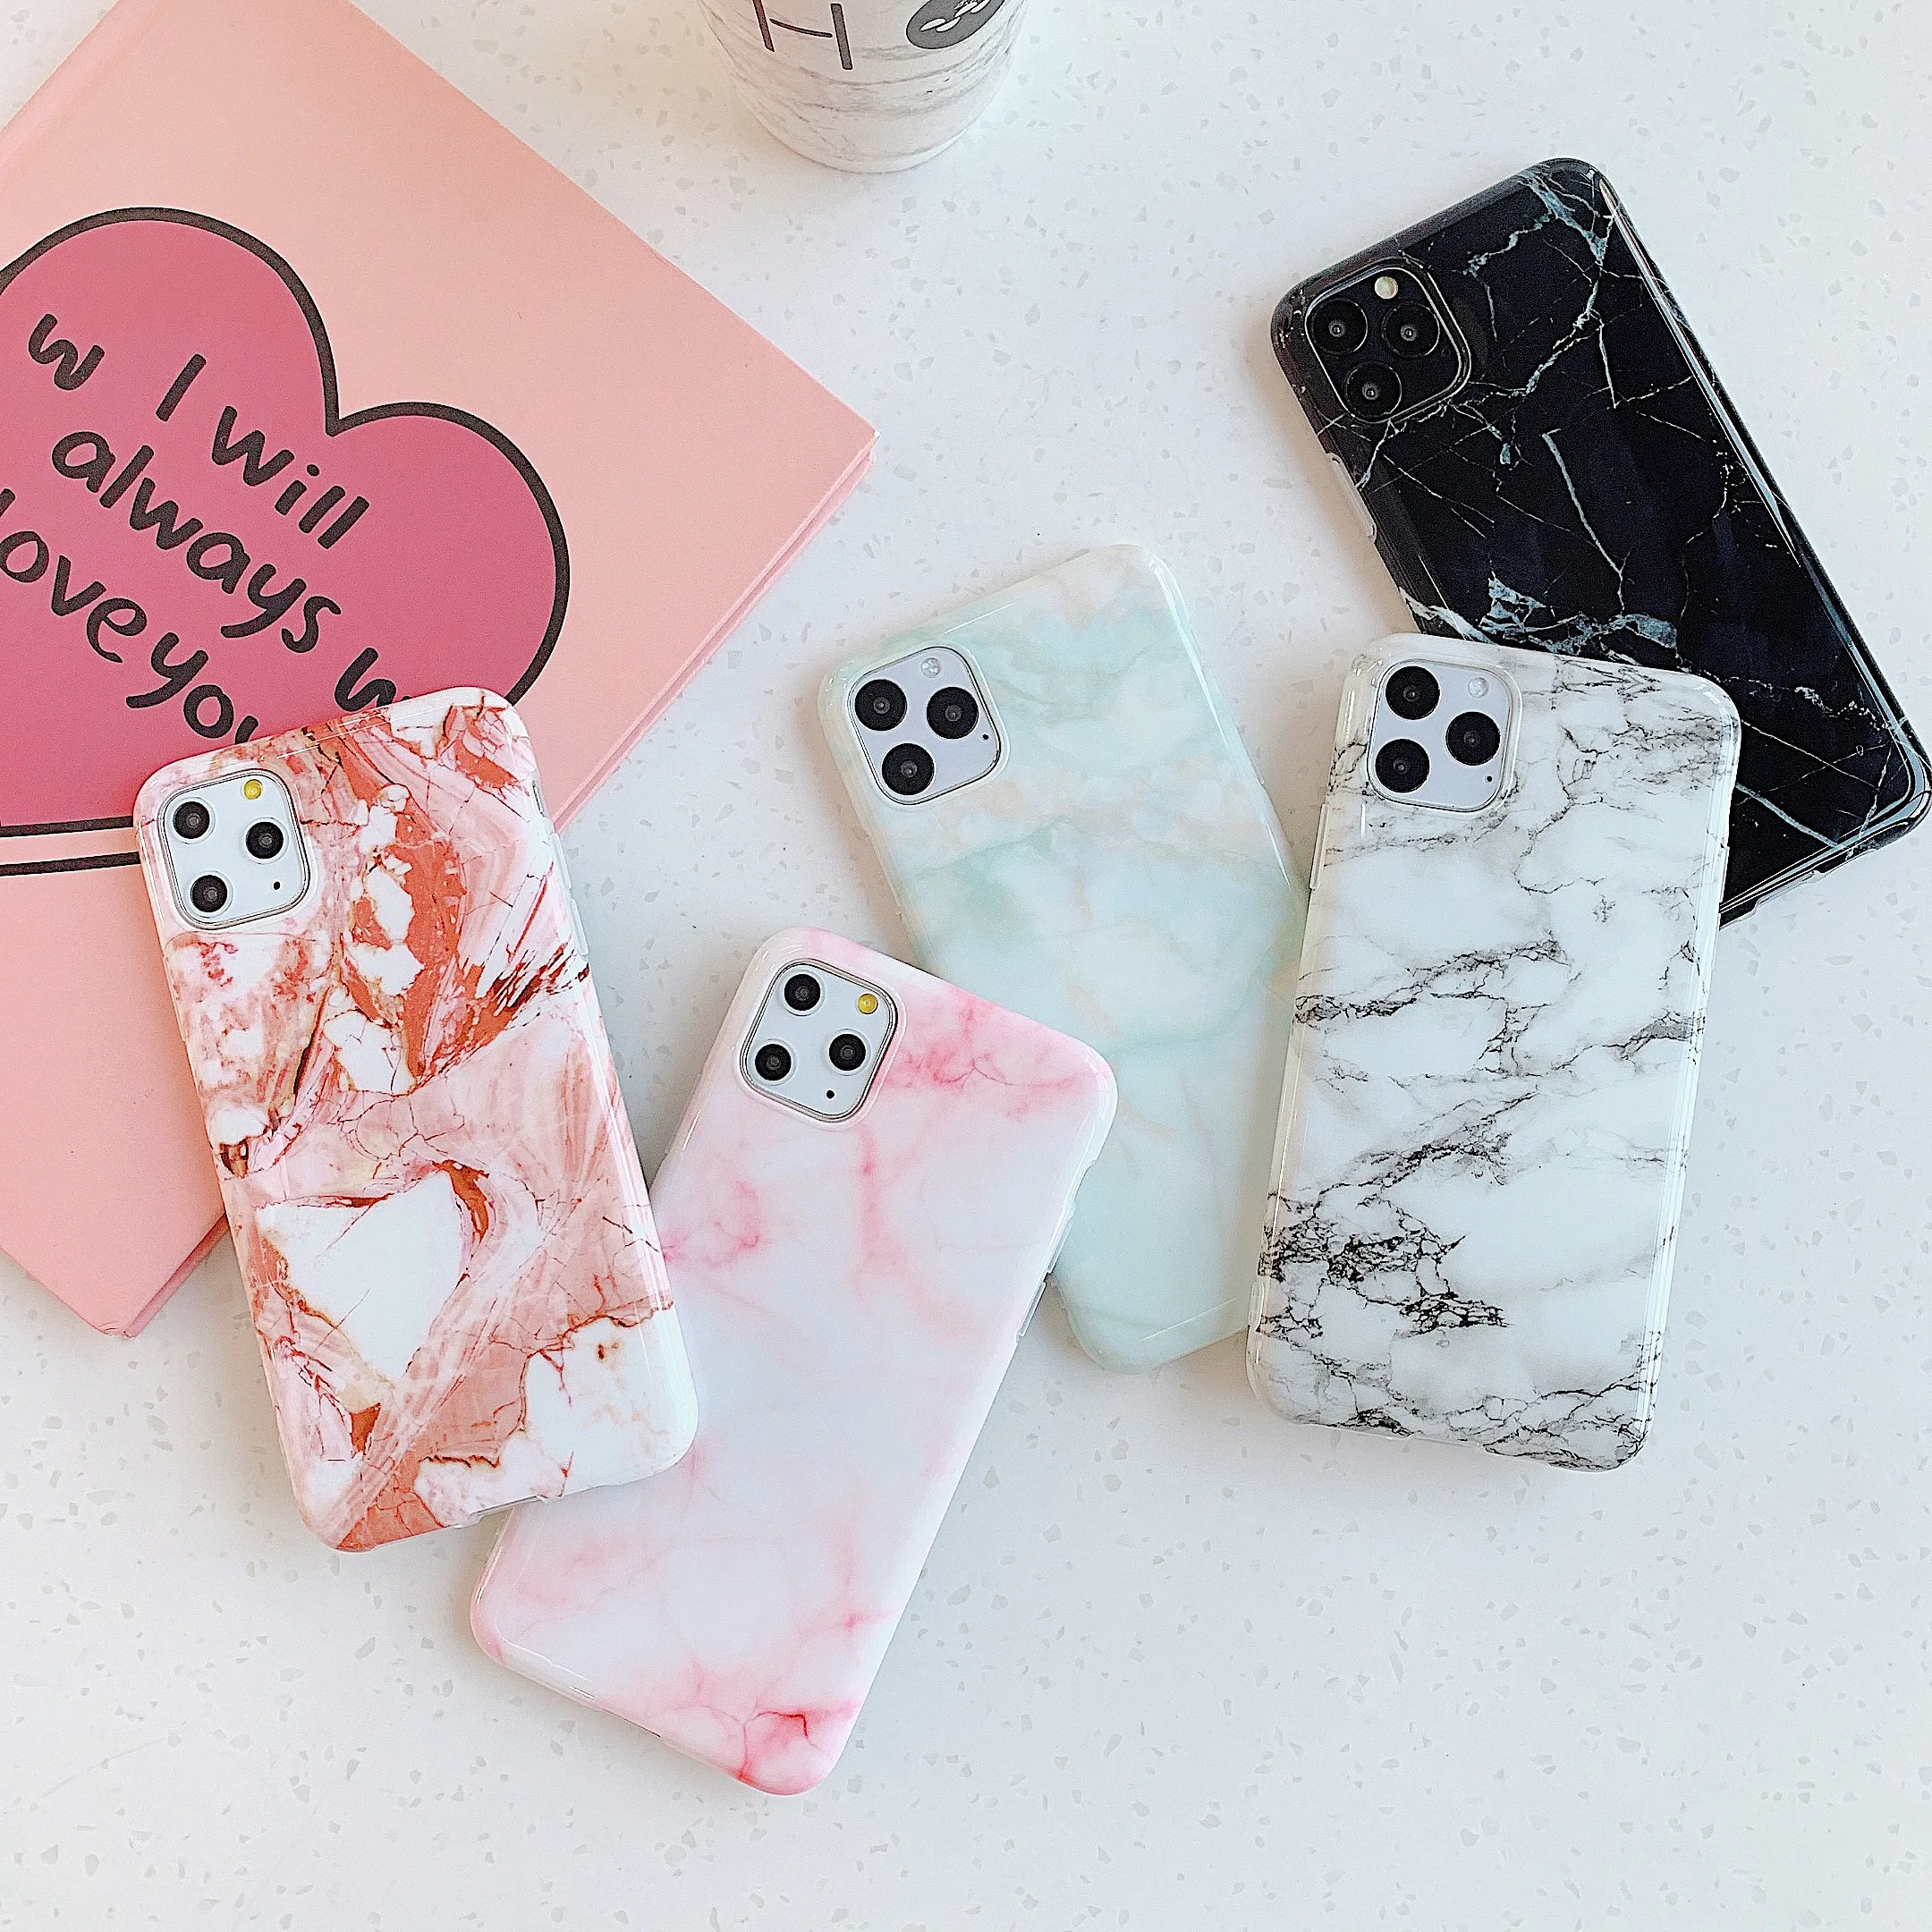 

Marble phone case For iphone 7 6s 6 8 8Plus X XS XR XsMAX 11Pro 11 11ProMAX SE2020 Smooth IMD soft silicone back cover